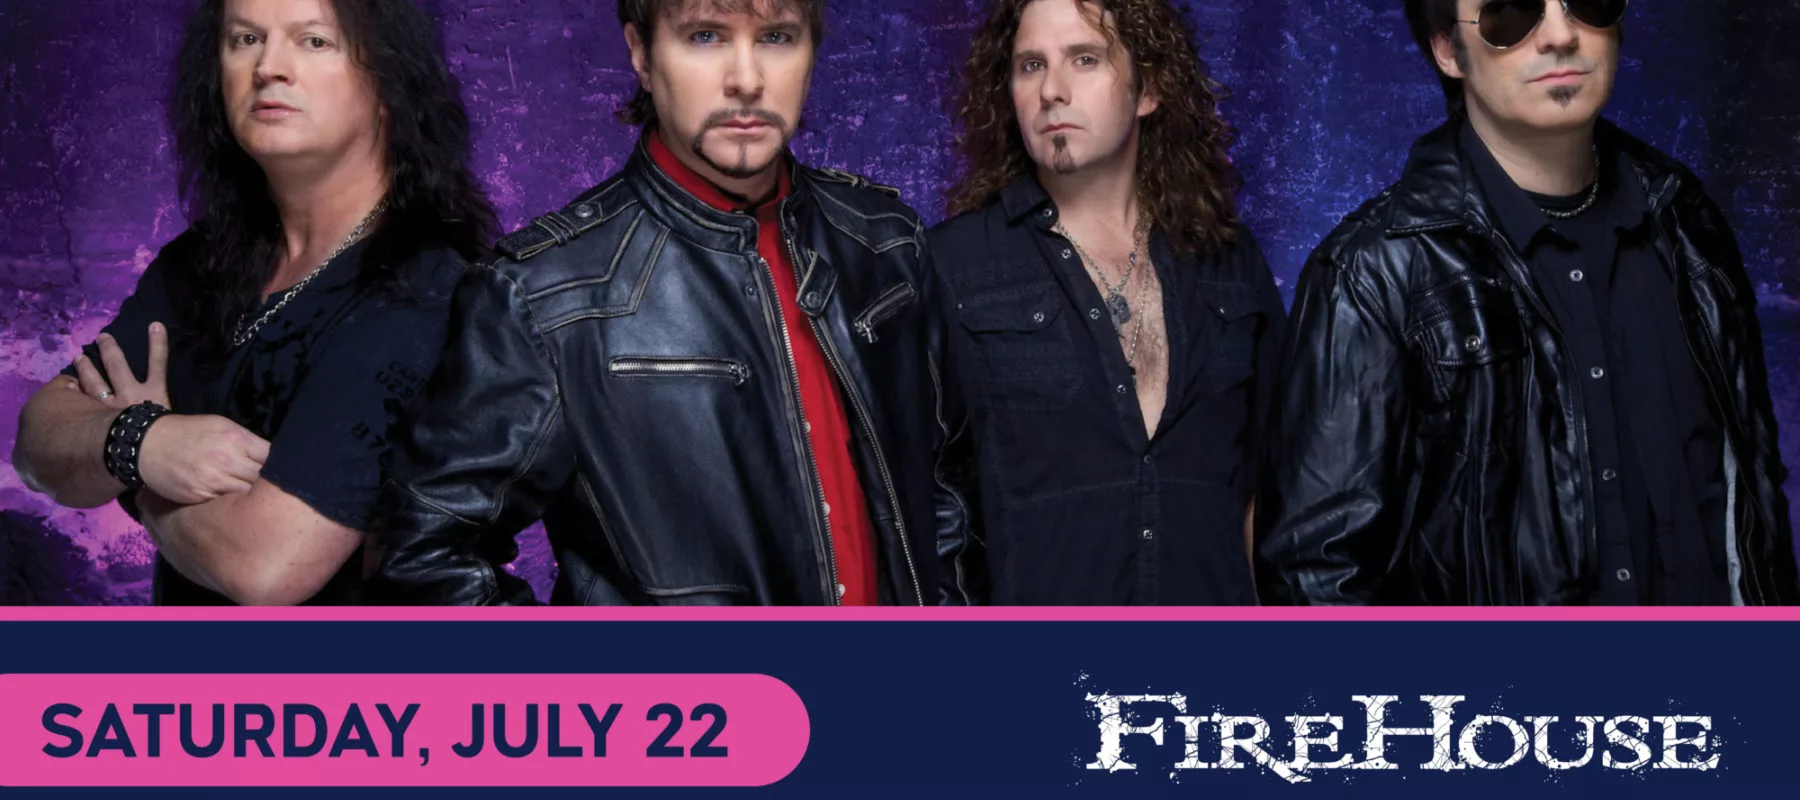 1990s Band, FireHouse, to Perform a Free Concert in Jefferson Tonight ...